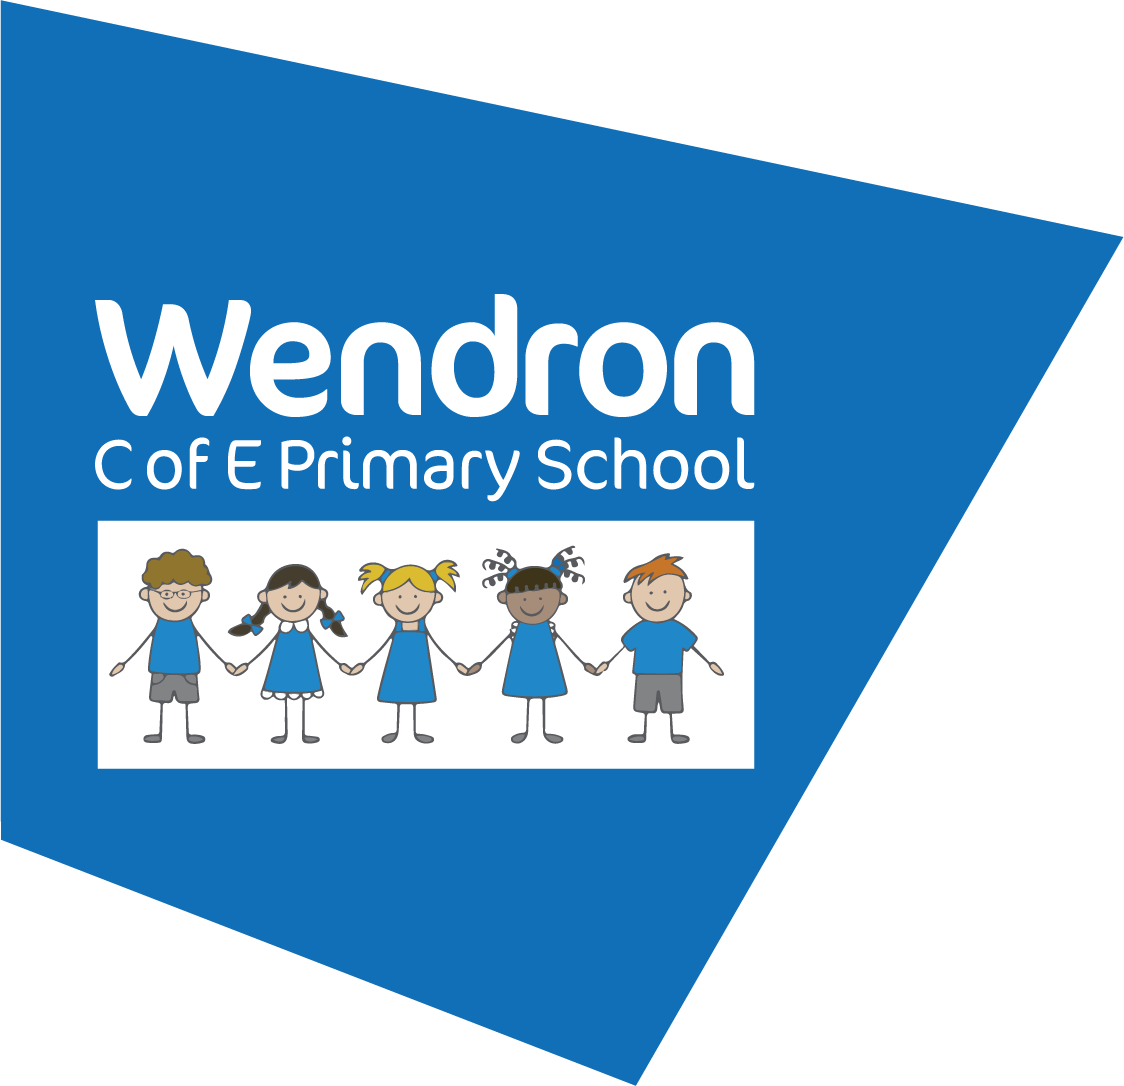 Wendron Church of England Primary School logo